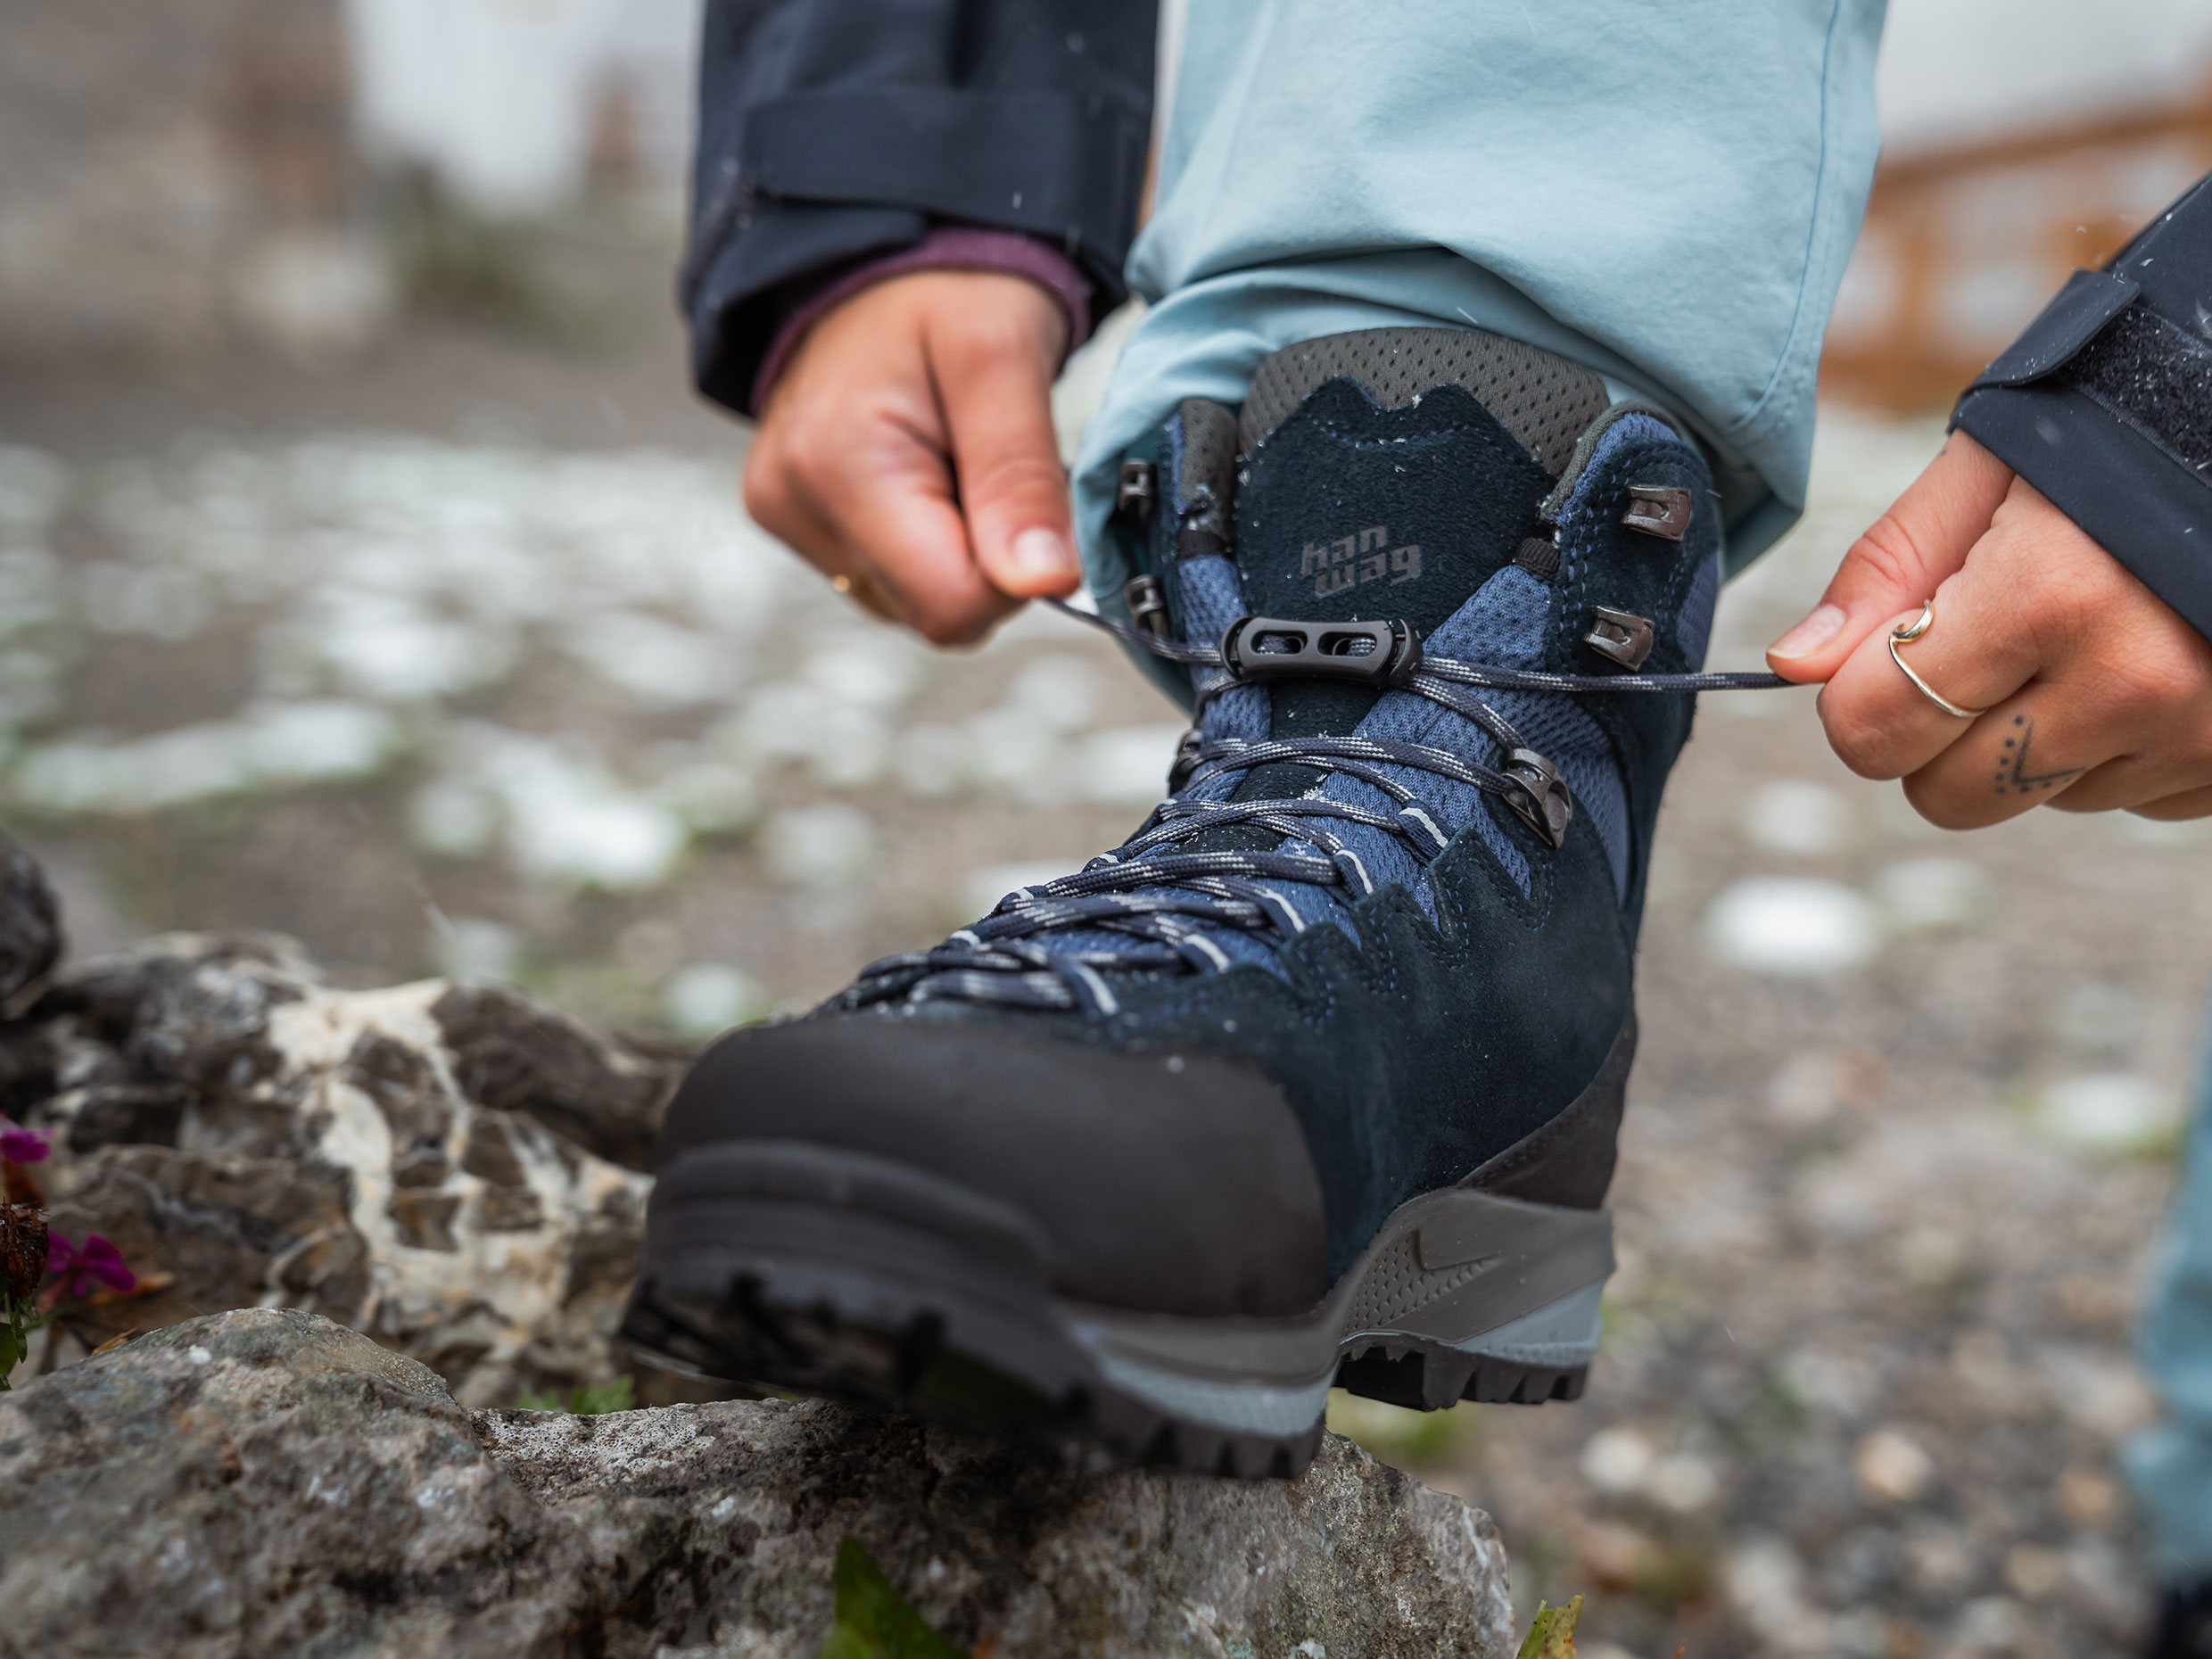 A woman laces up her hiking boots as she breaks them in